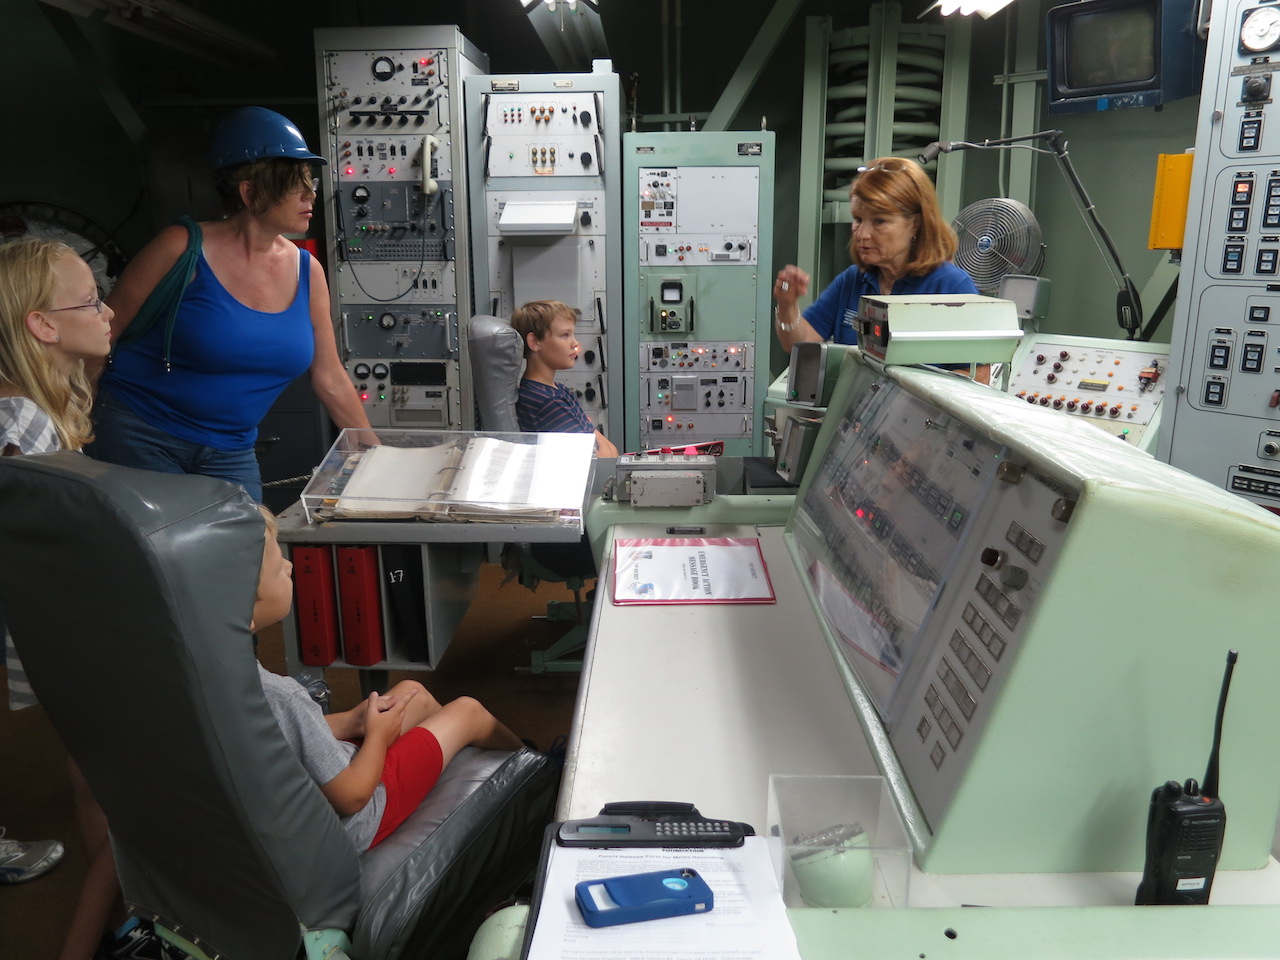 A family experiencing the Titan Launch Control Center tour with docent and past crew member Maggie.